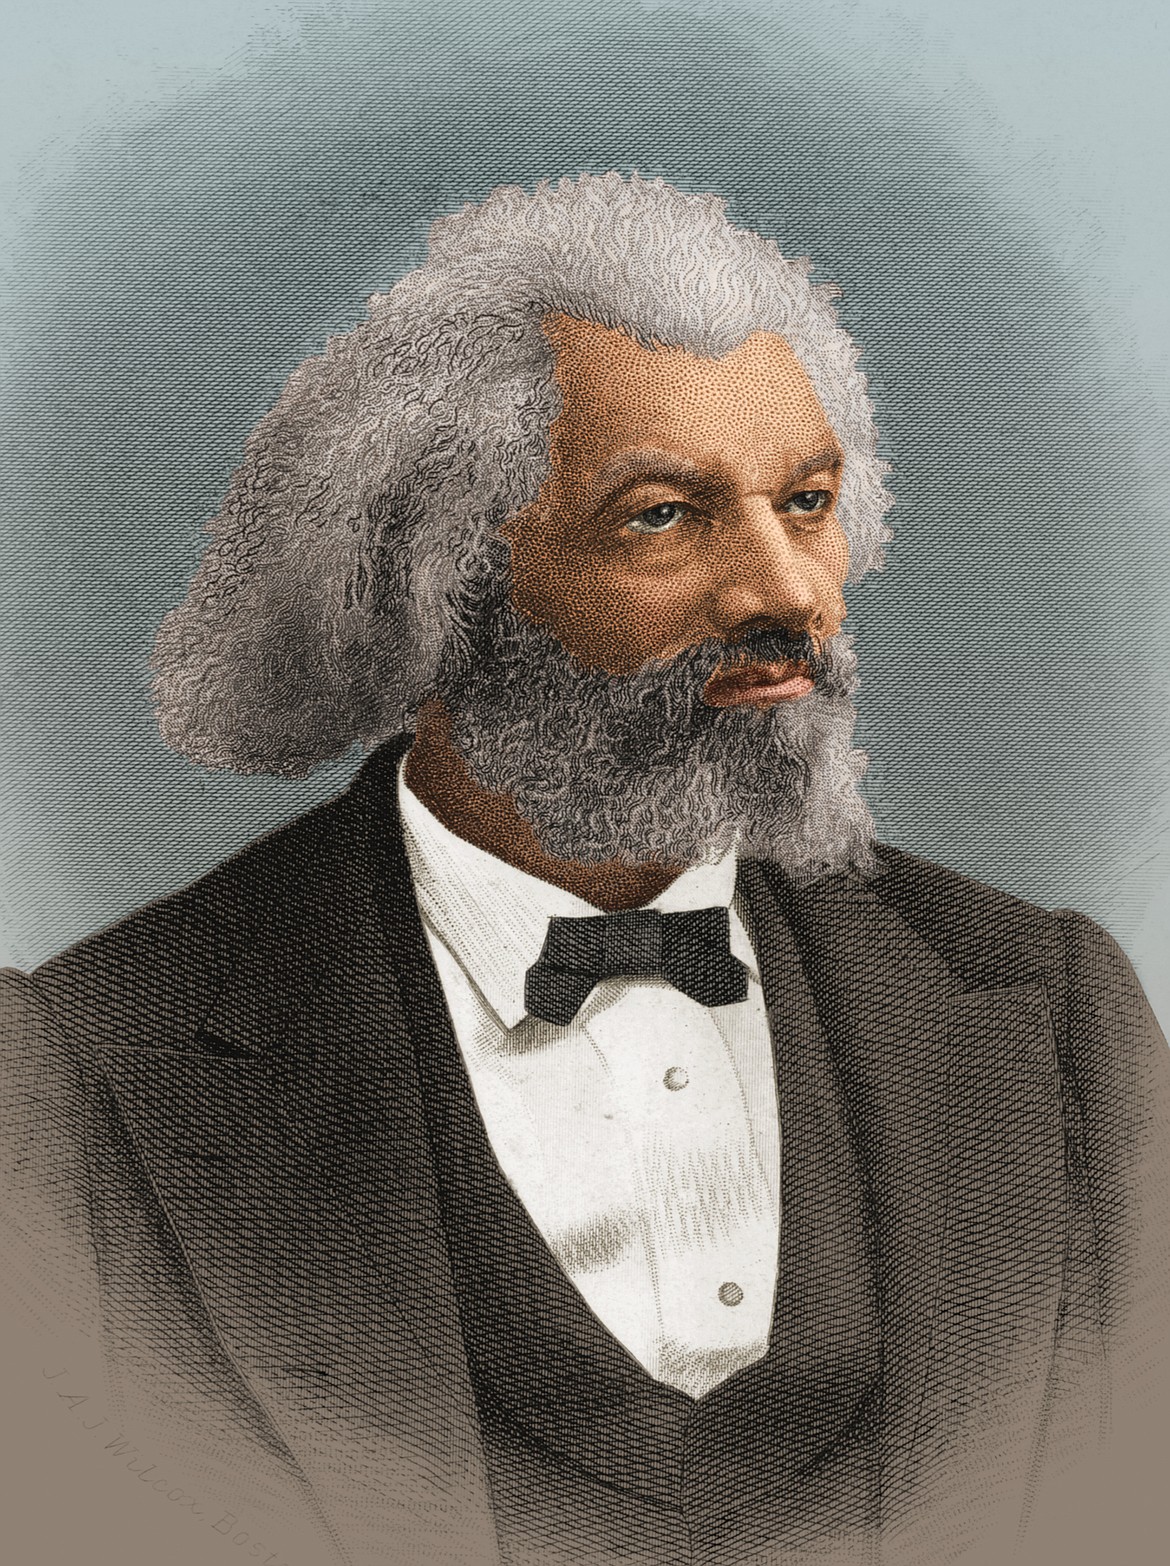 With the aid of a free black woman, abolitionist Fredrick Douglas (c.1818-1895)	escaped slavery in Maryland by boarding a train heading north posing as a sailor, carrying Seamen Protection Papers obtained from a free black sailor.